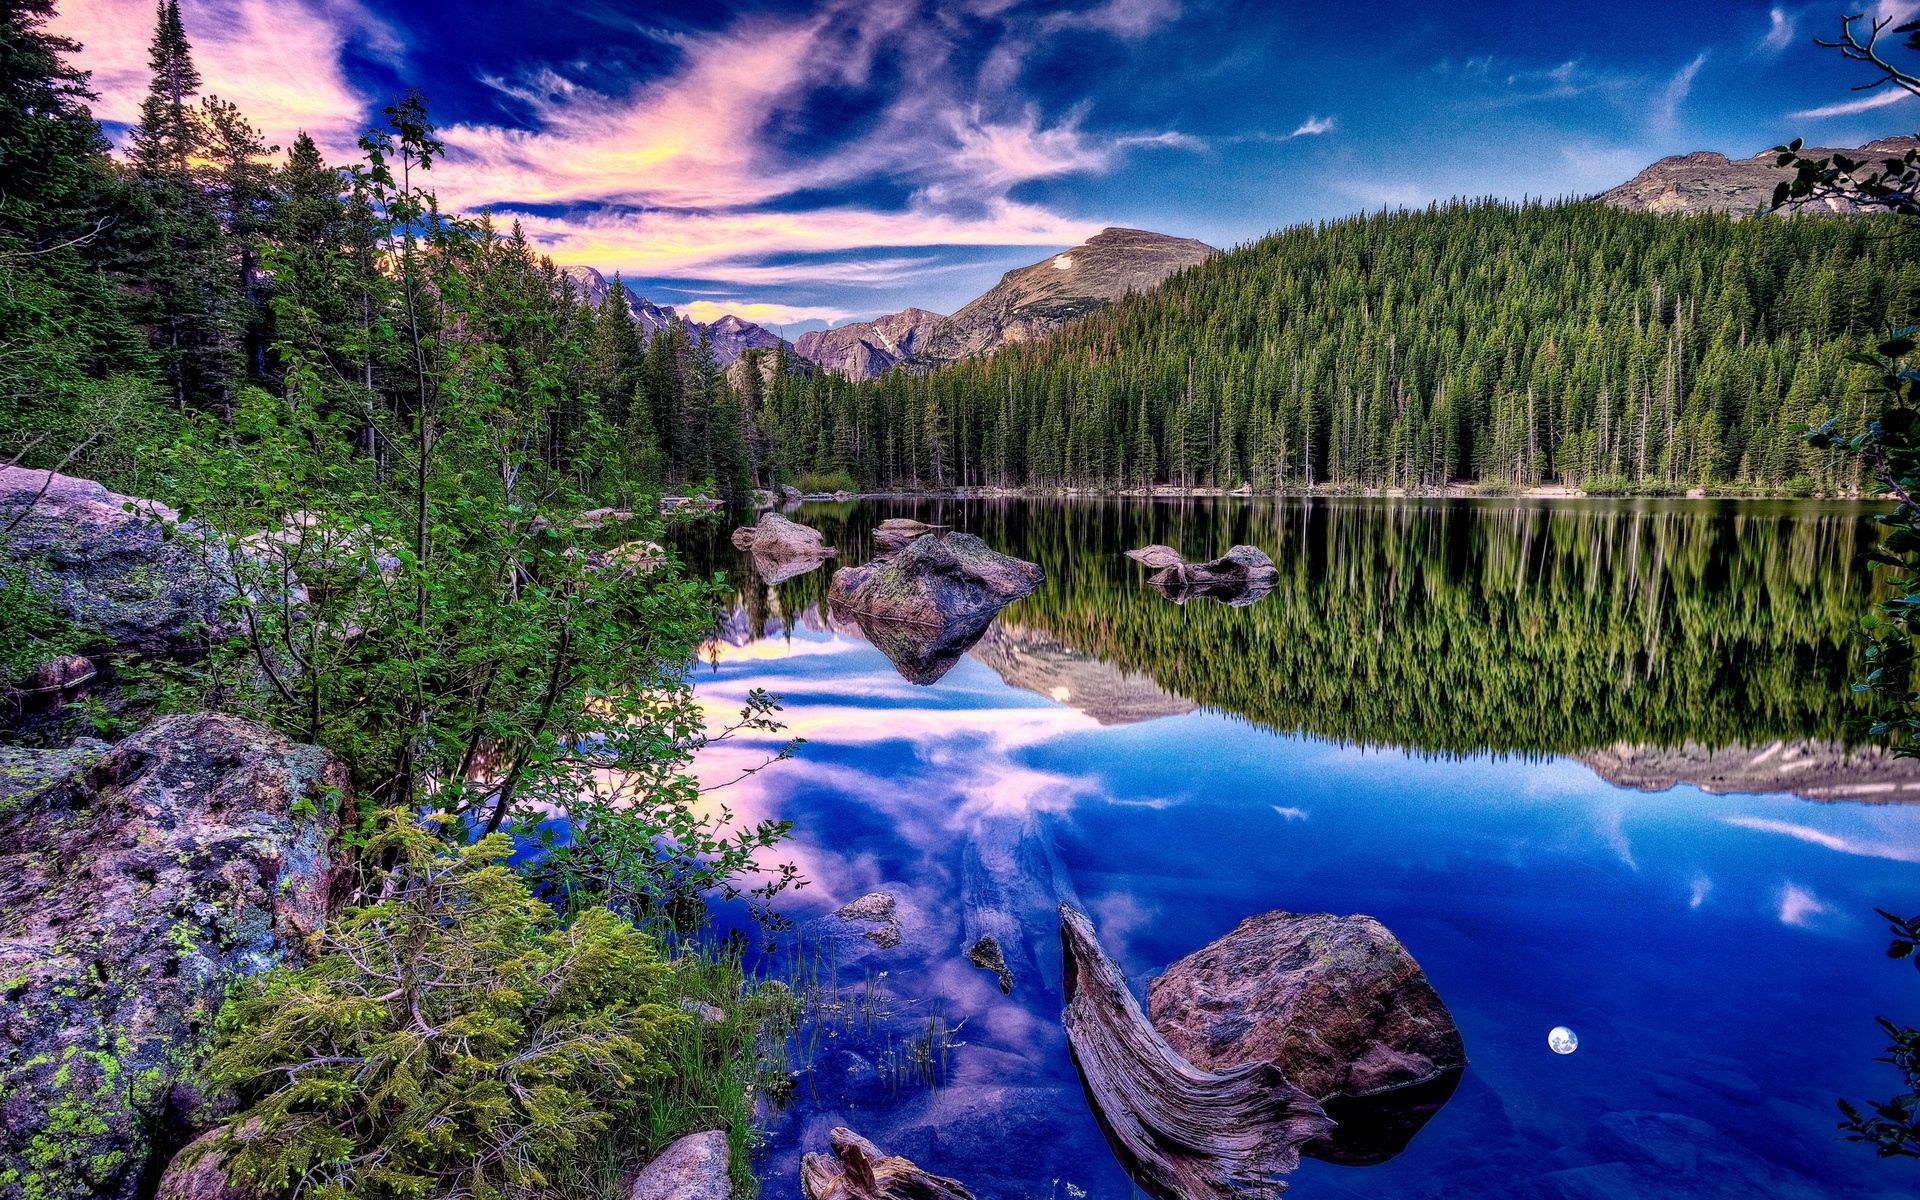 contrast, mountains, shore, clouds, brightly, nature, stones, sky, lake, reflection, bank, forest, mirror, snag